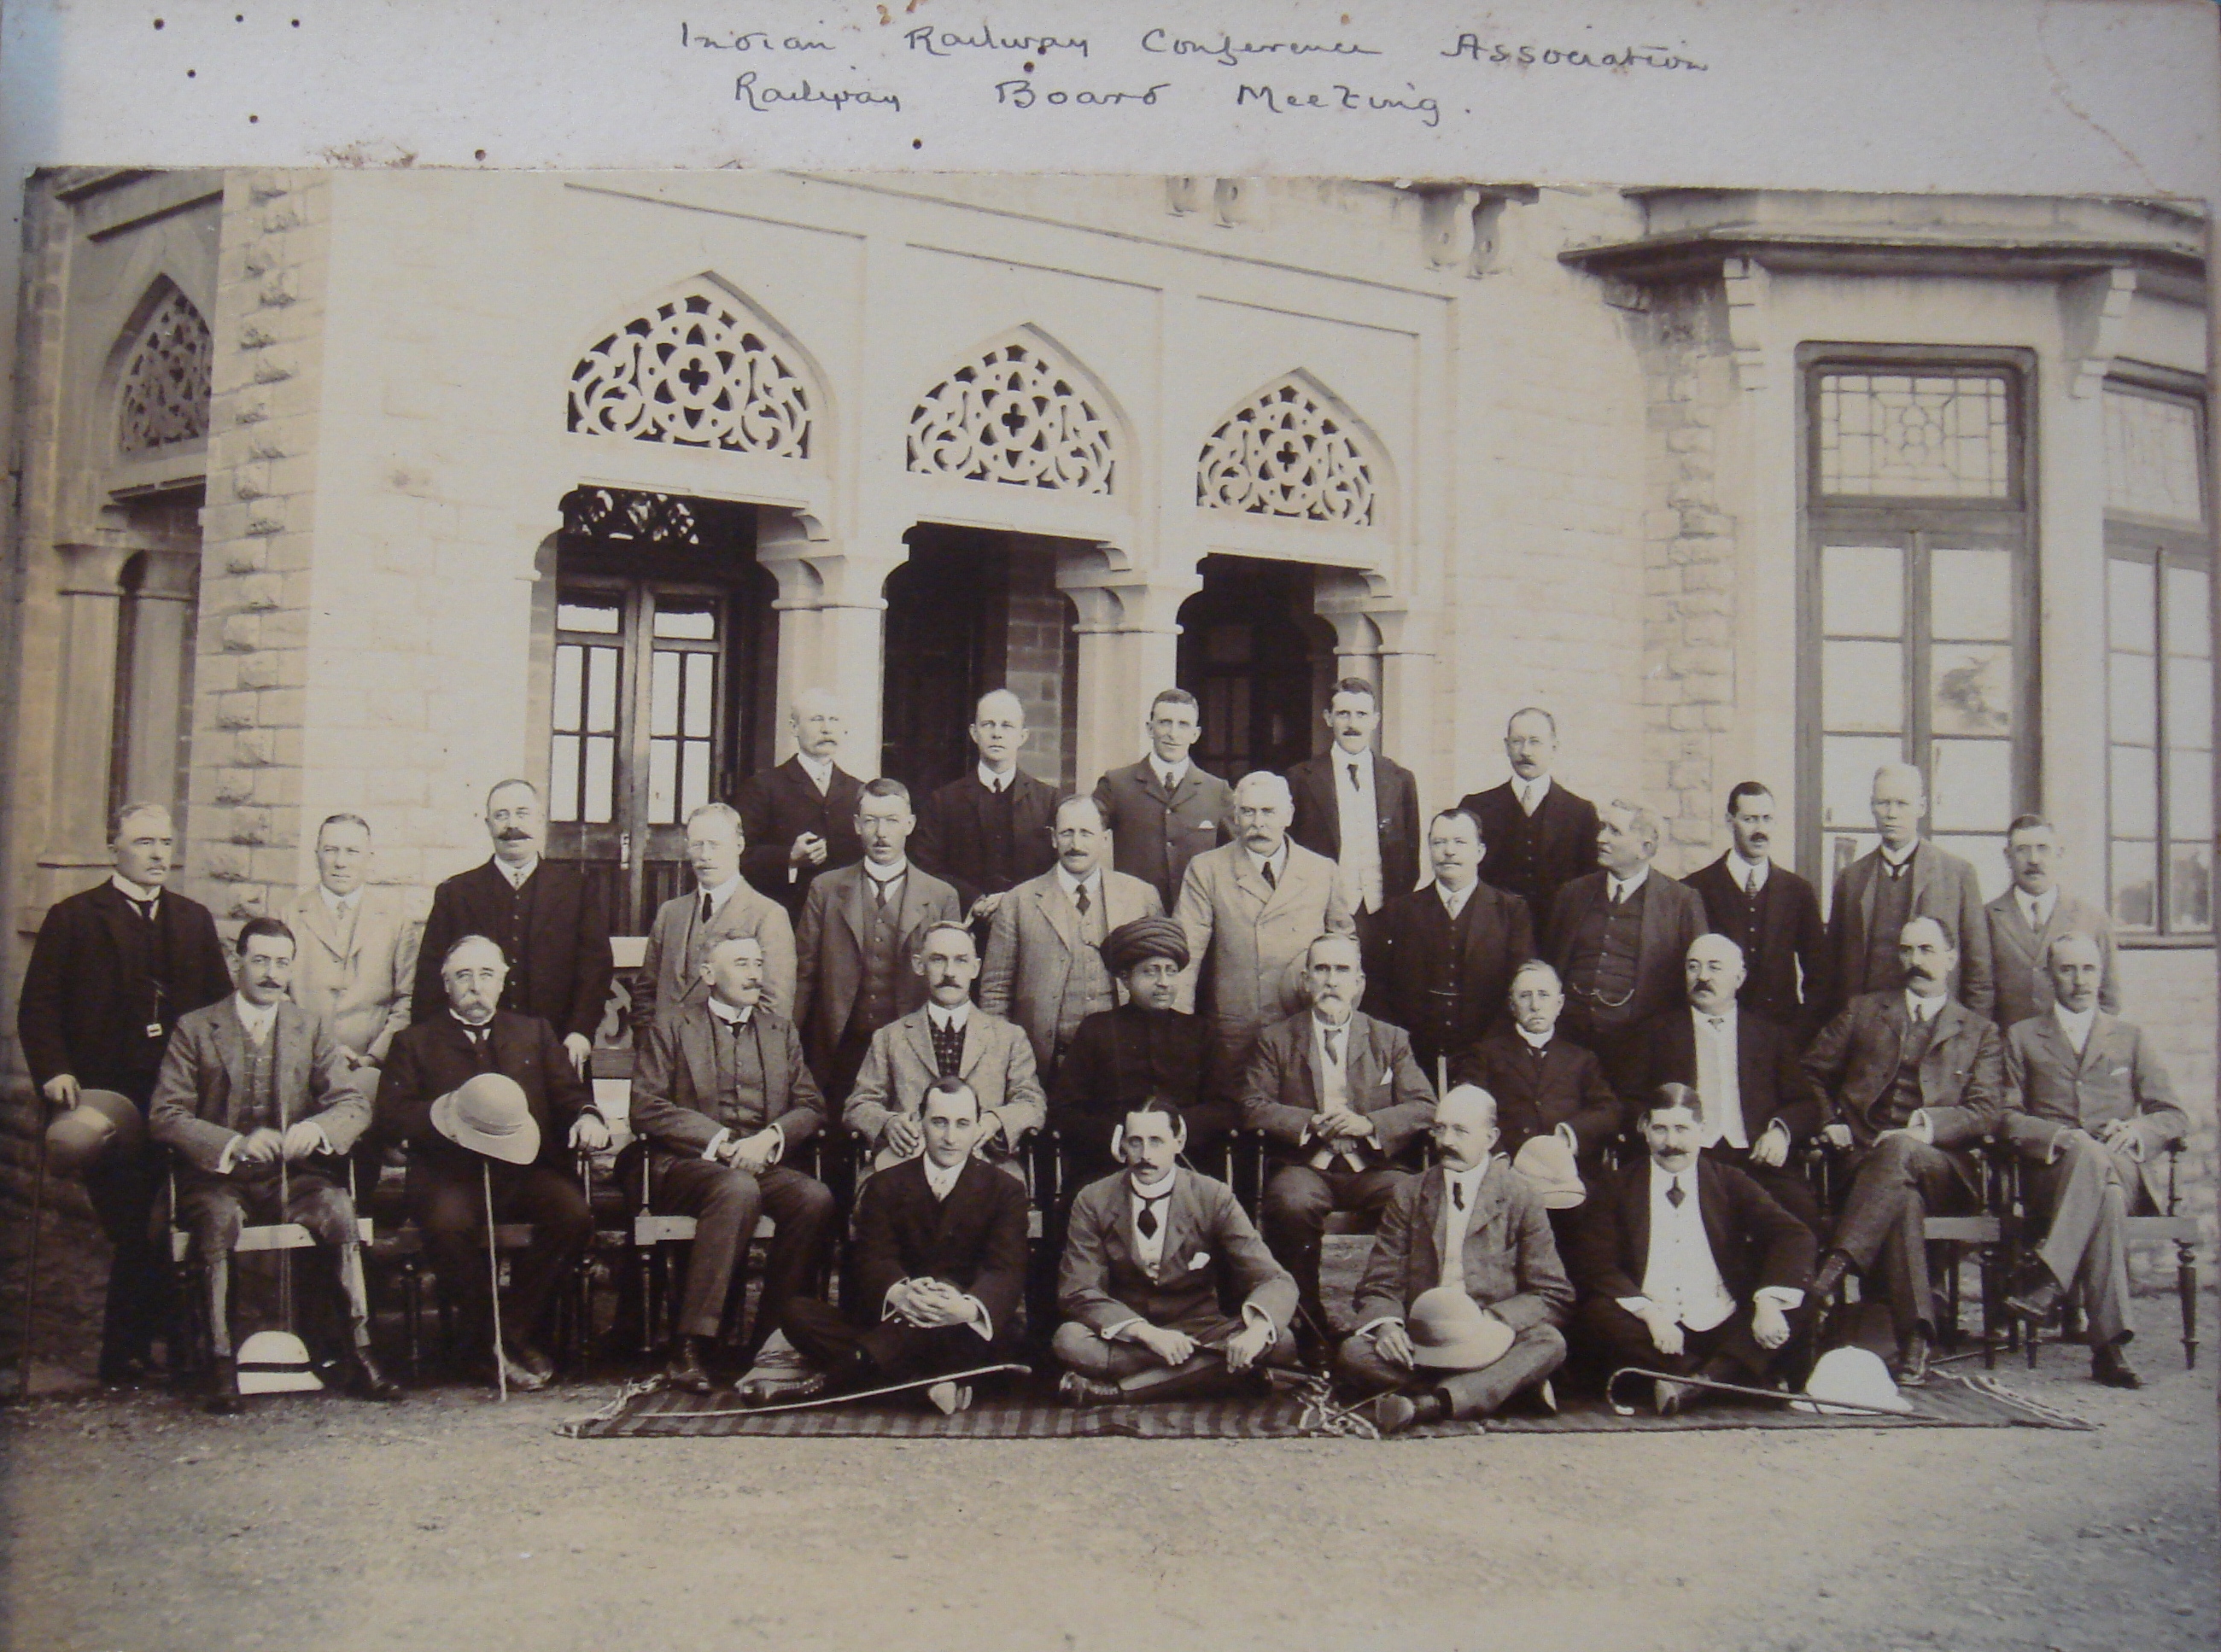 Indian Railway Conference Association 1911 Sept